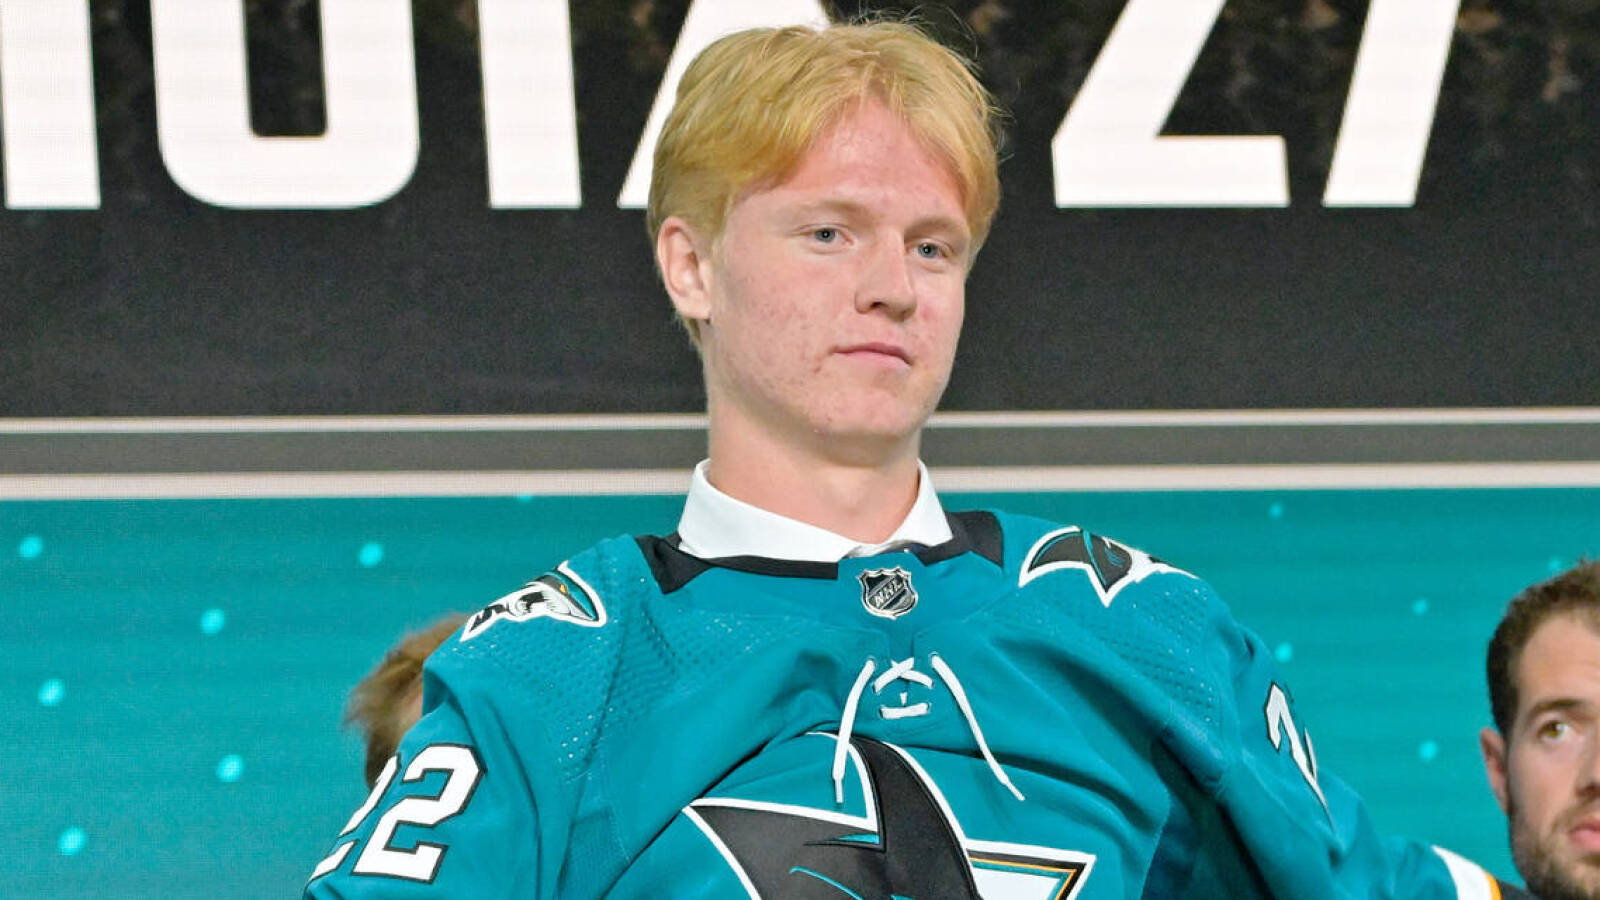 Sharks’ First-Round Pick To Make AHL Debut Tonight